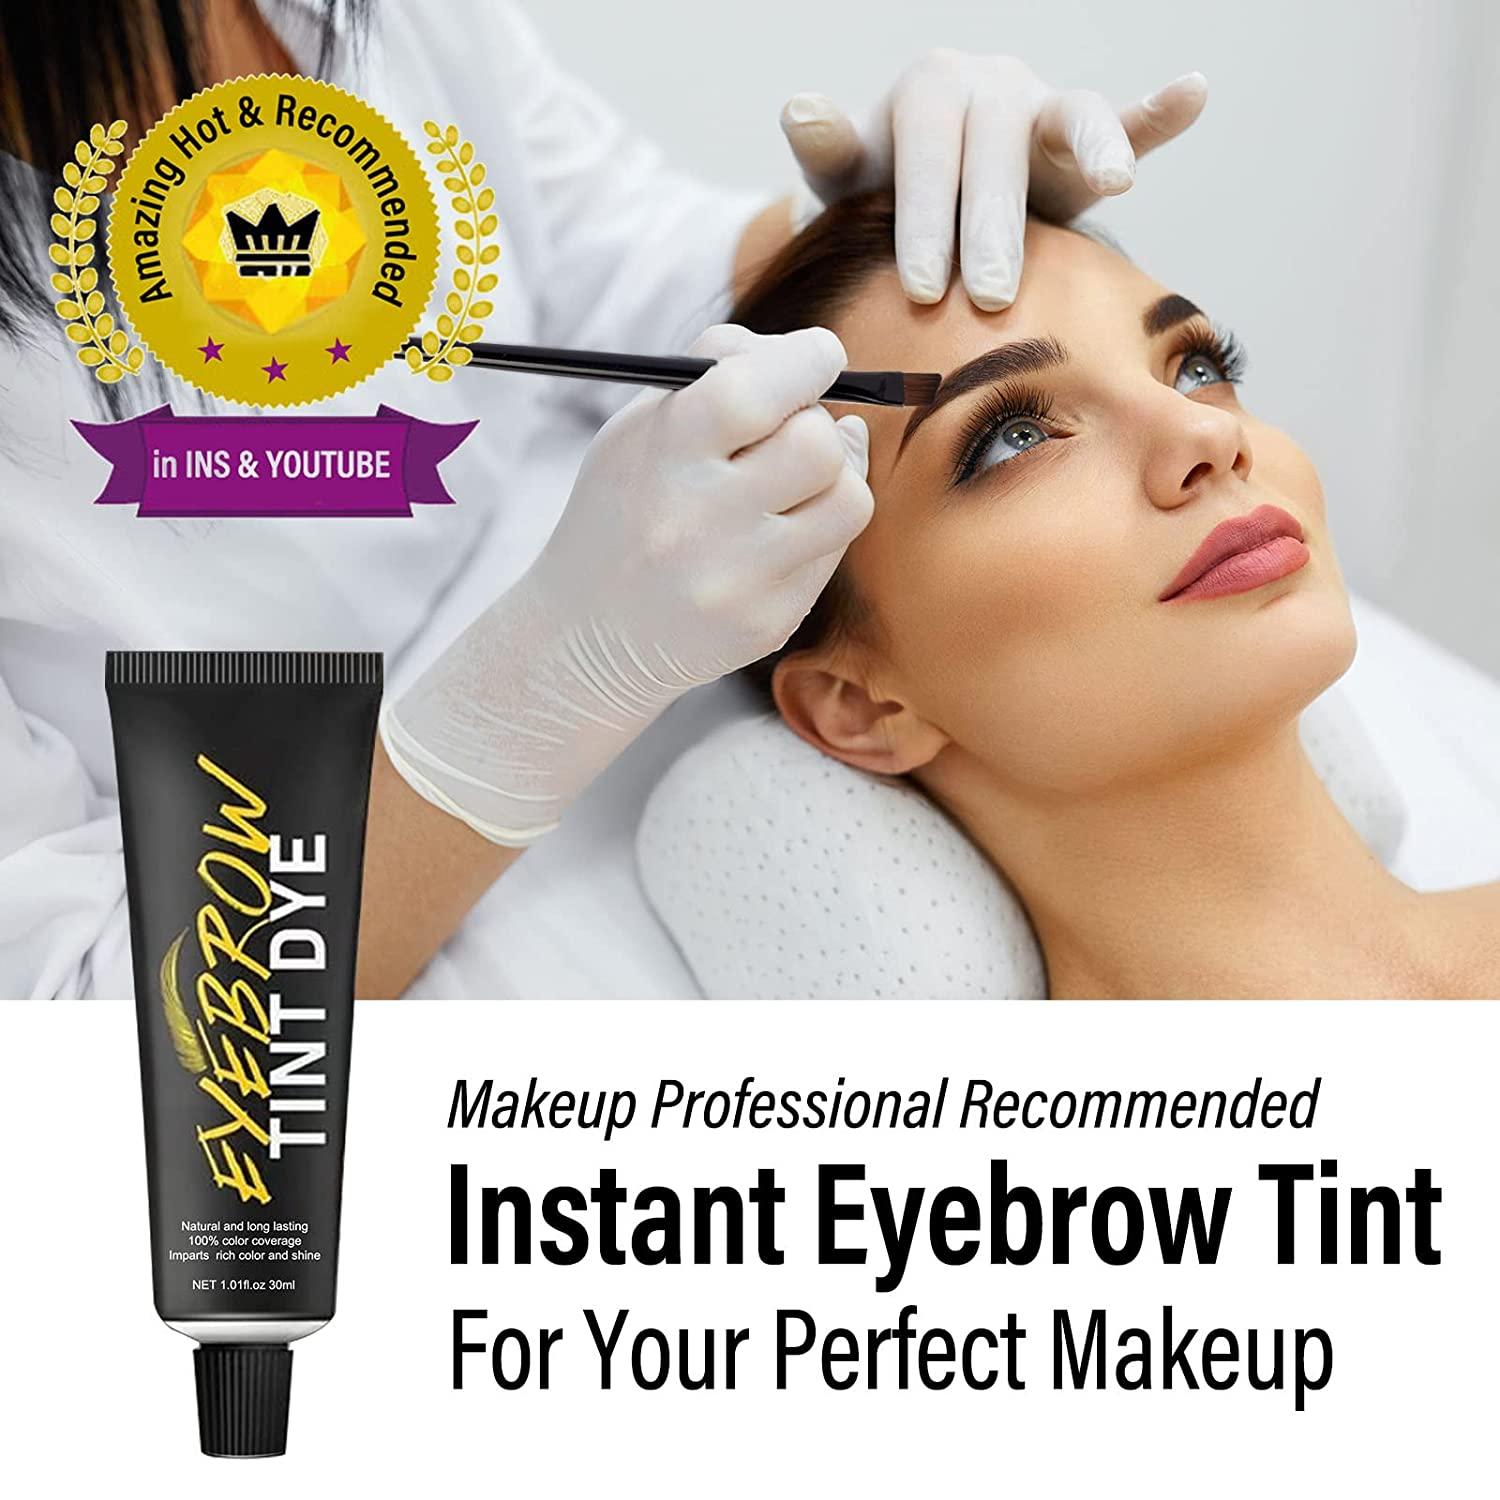 Get incredible deals on products, brow and makeup services this